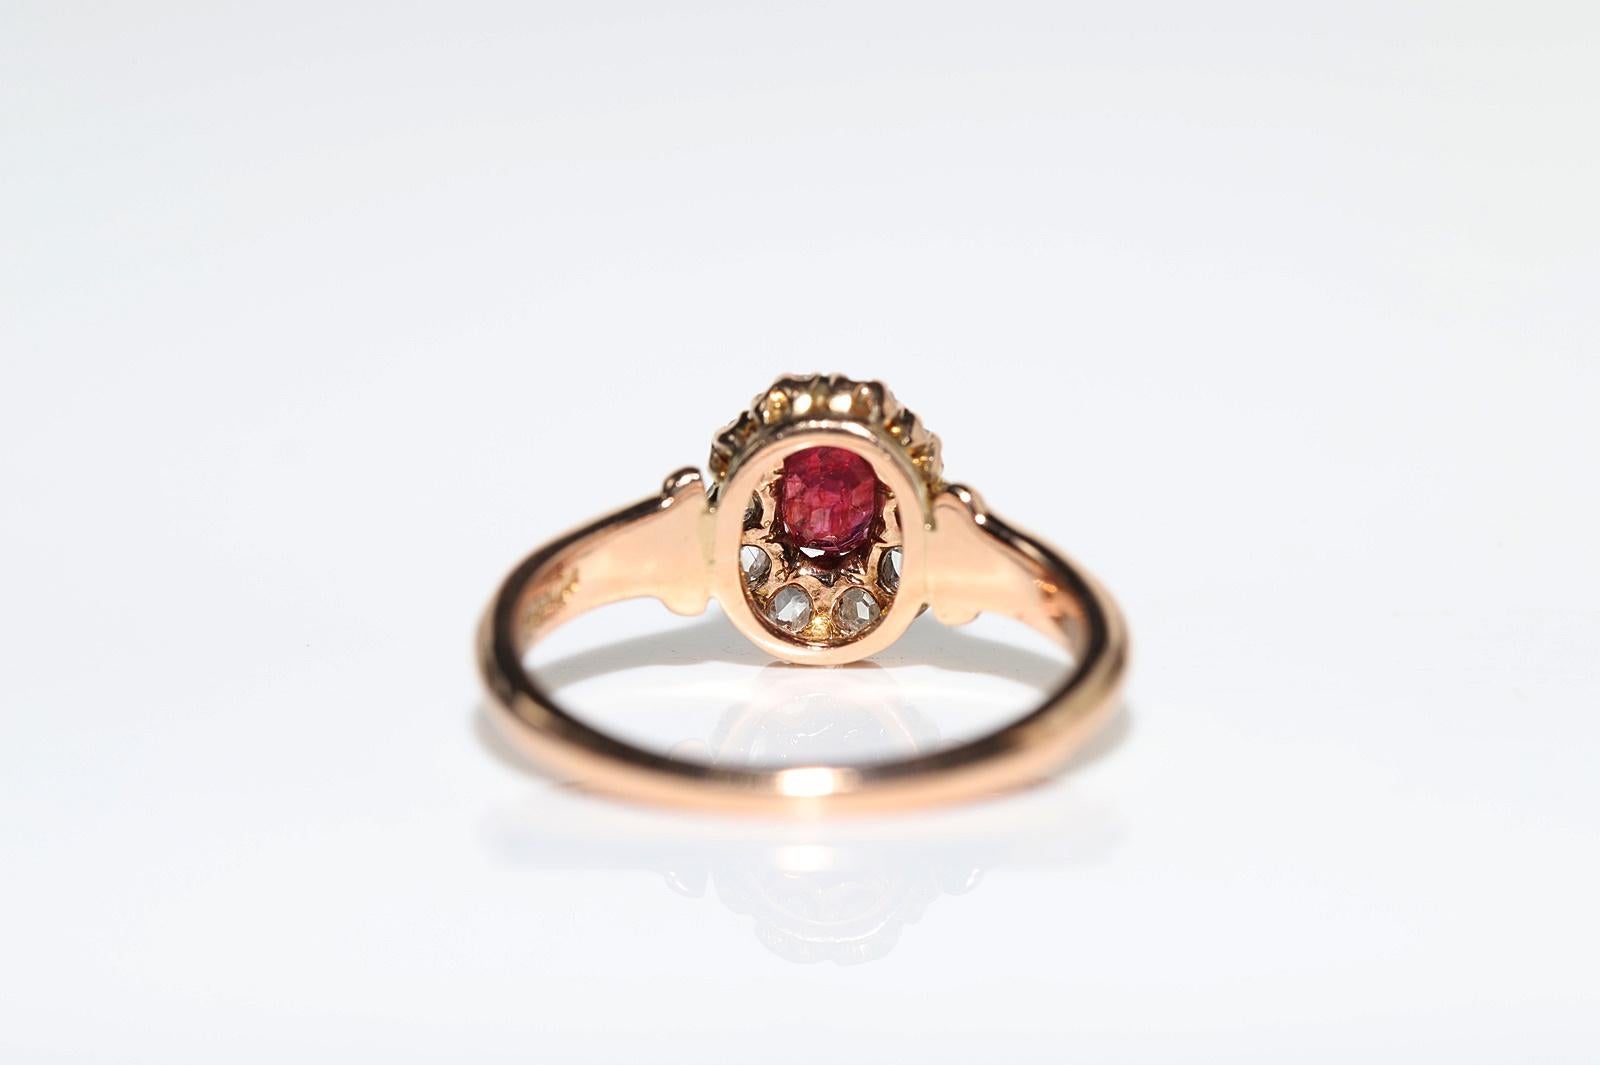 Antique Circa 1900s 14k Gold Natural Rose Cut Diamond And Ruby Decorated Ring 2